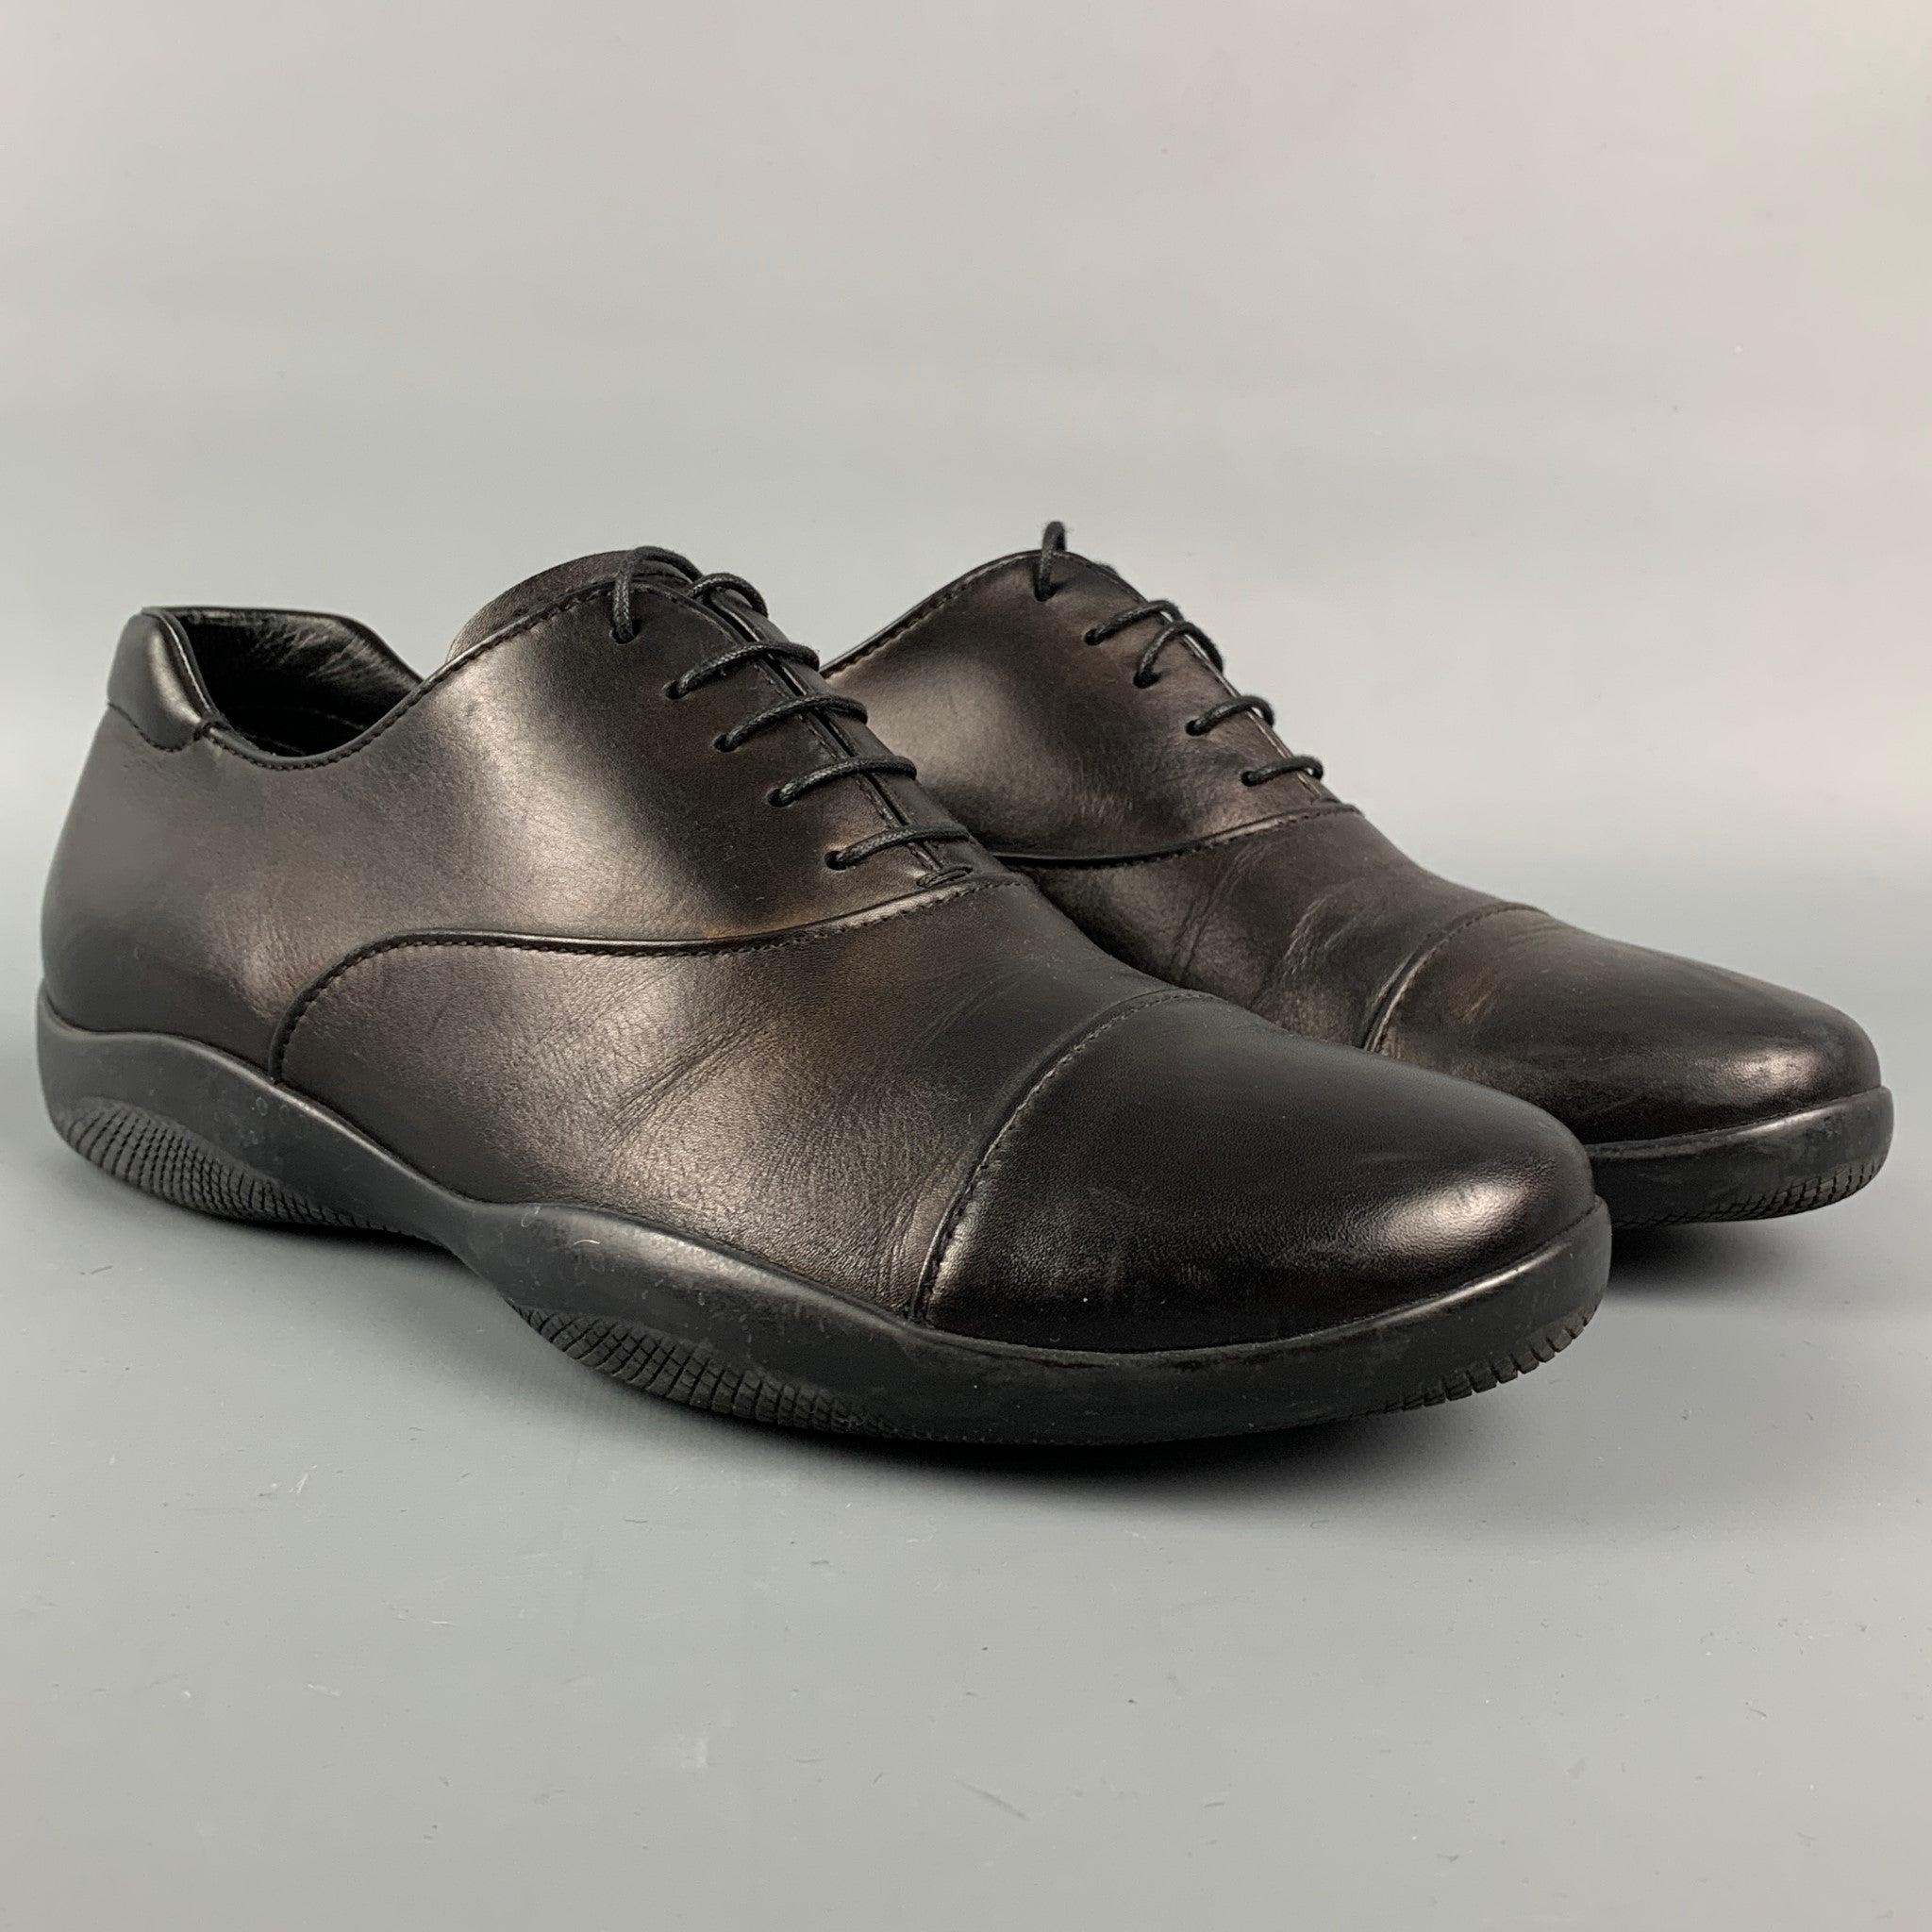 PRADA SPORT shoes comes in a black leather featuring a cap toe. rubber sole, and a lace up closure.
Very Good
Pre-Owned Condition. 

Marked:   4 E 0770 5.5Outsole: 10.5 inches  x 4 inches 
  
  
 
Reference: 110957
Category: Lace Up Shoes
More